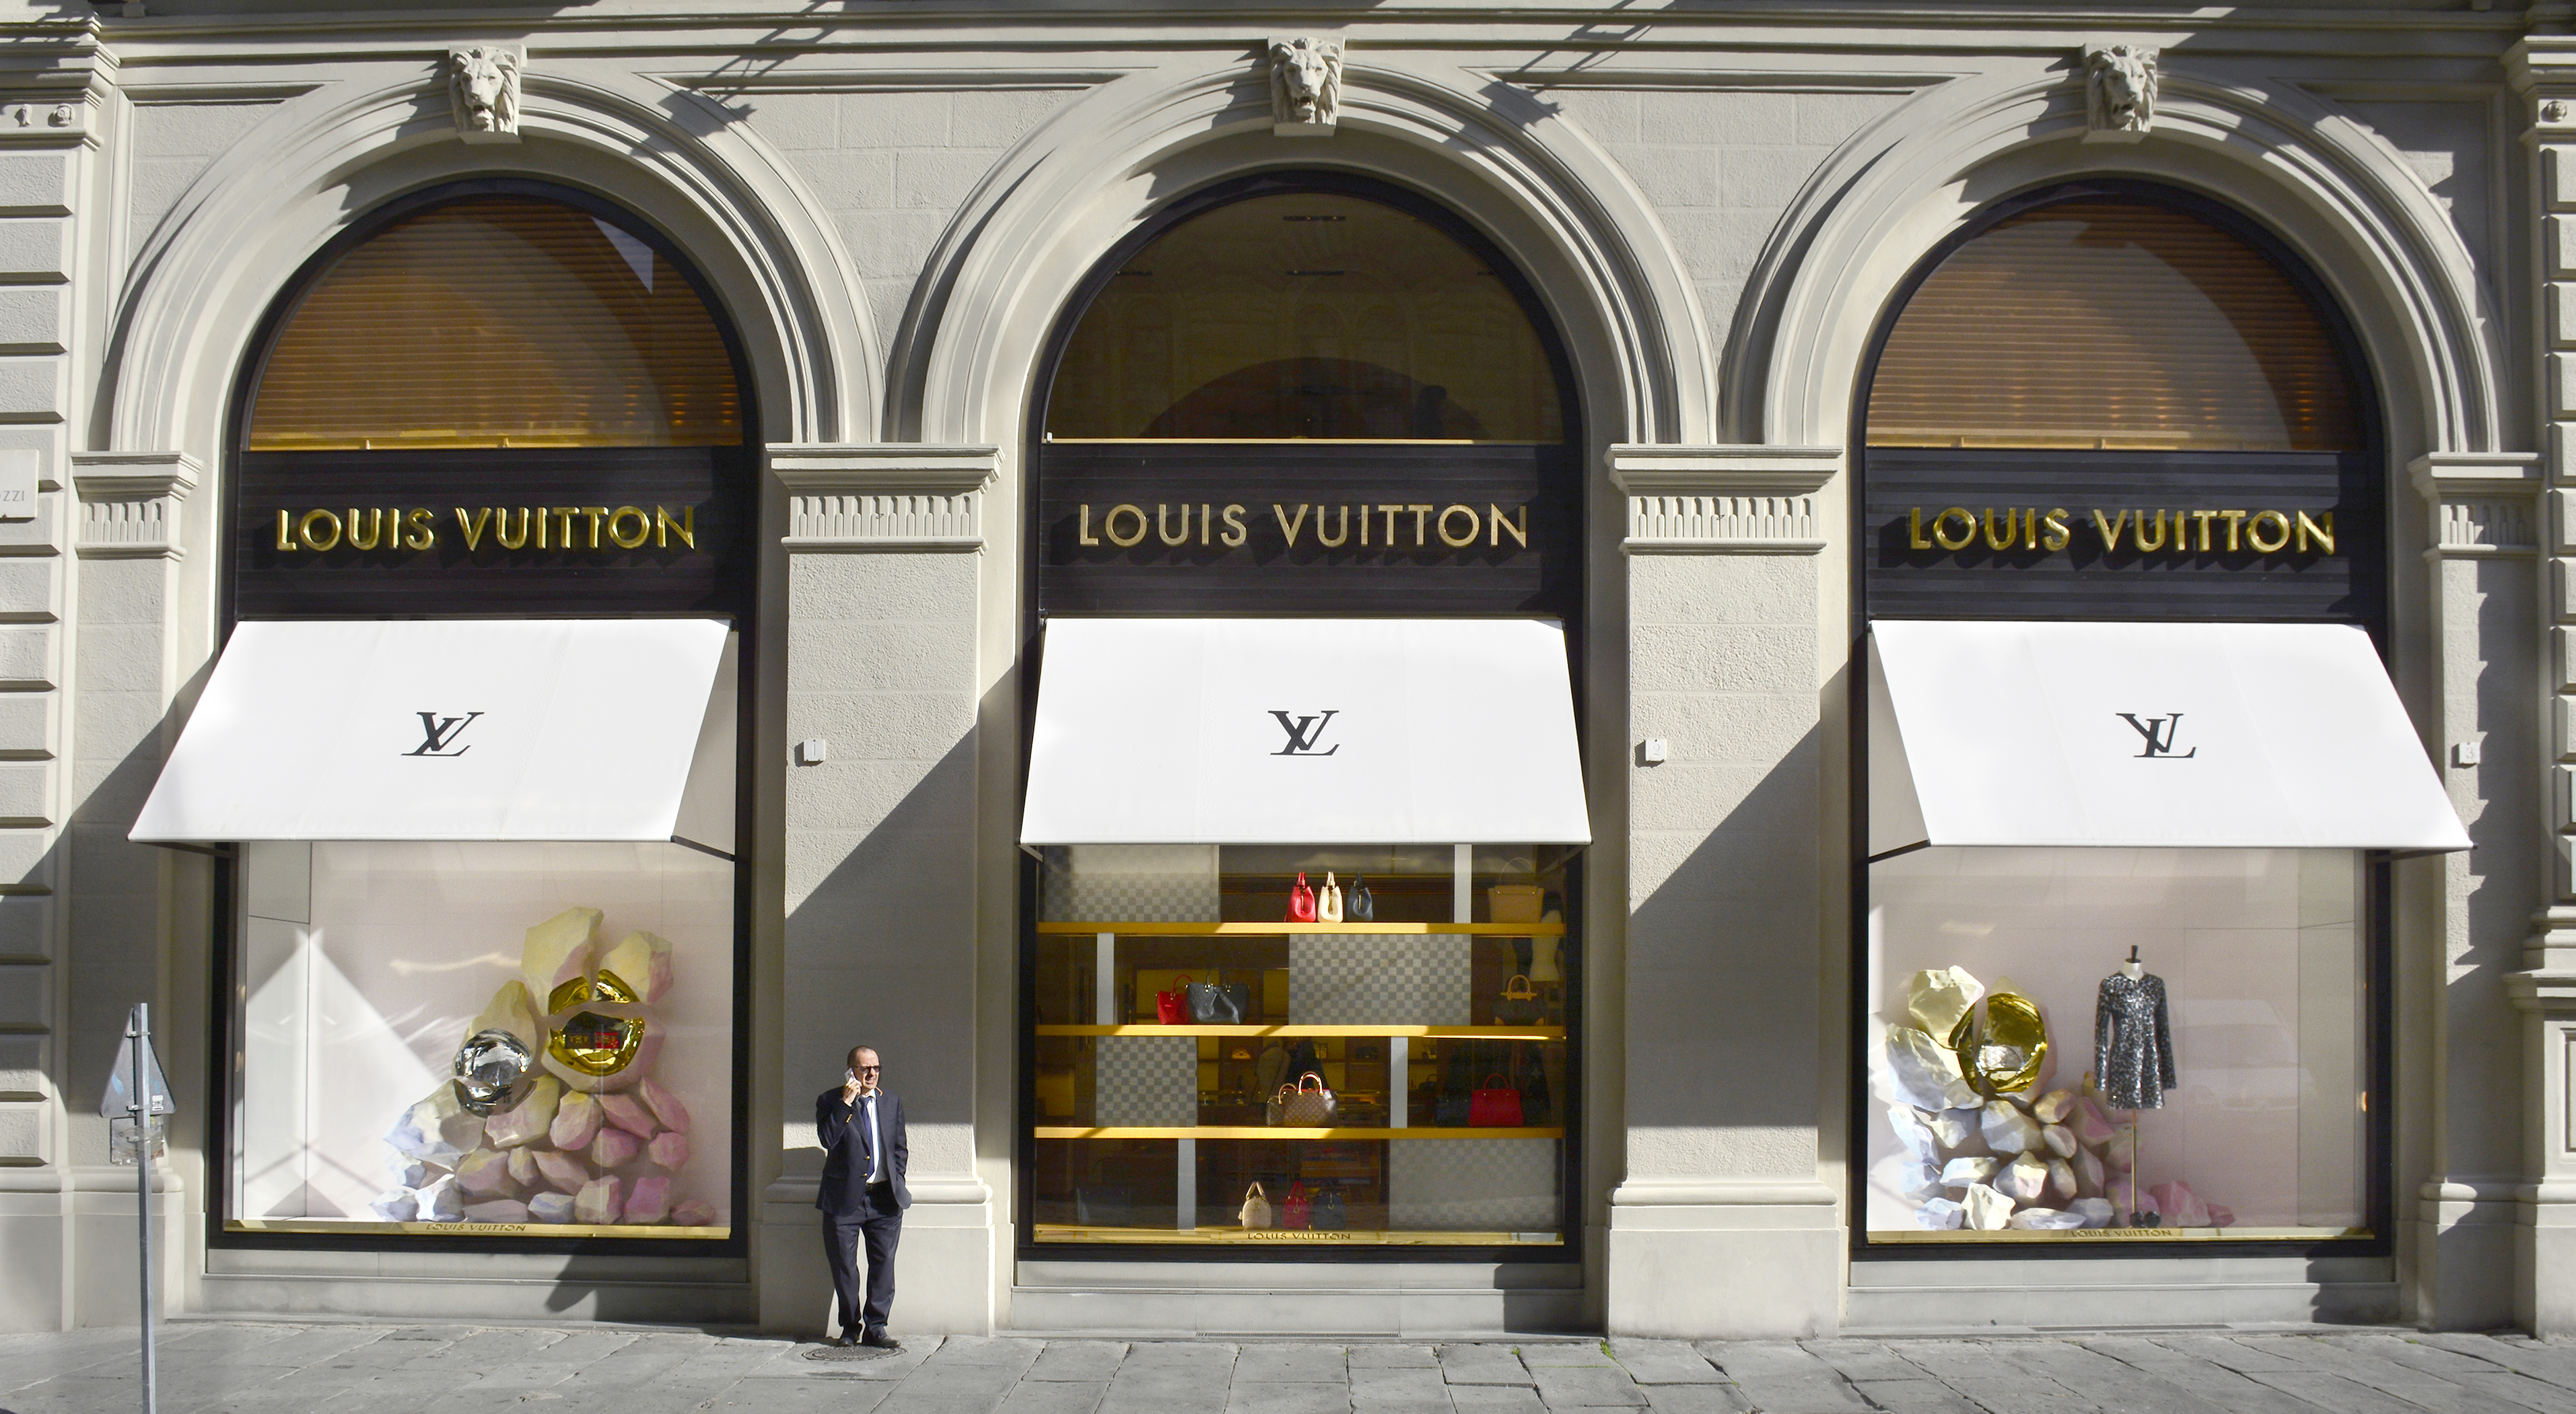 An LVMH store (Moet Hennessy. Louis Vuitton) at 22 Avenue